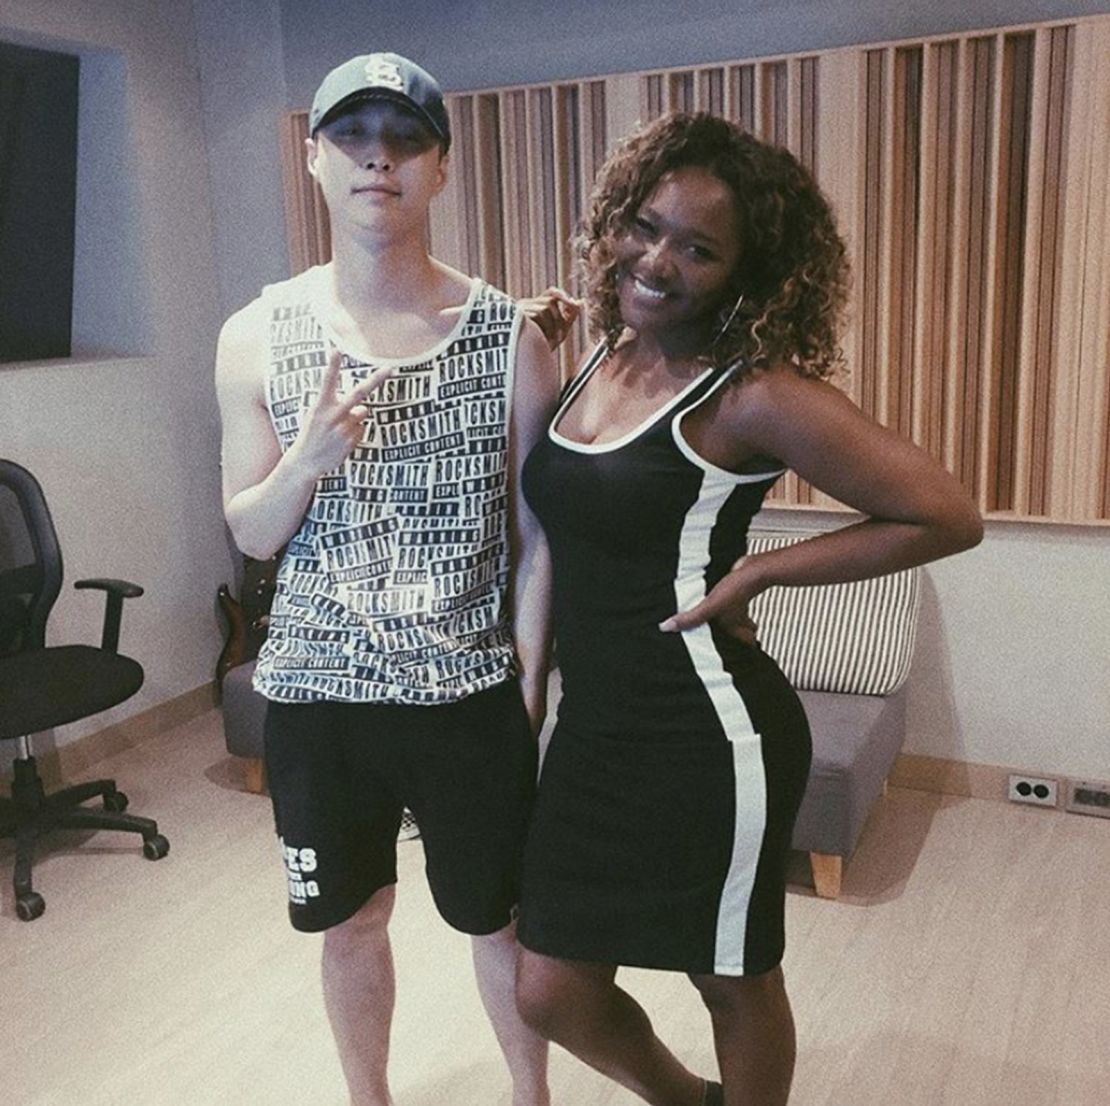 Chikk (right) with Lay of K-pop group EXO. 